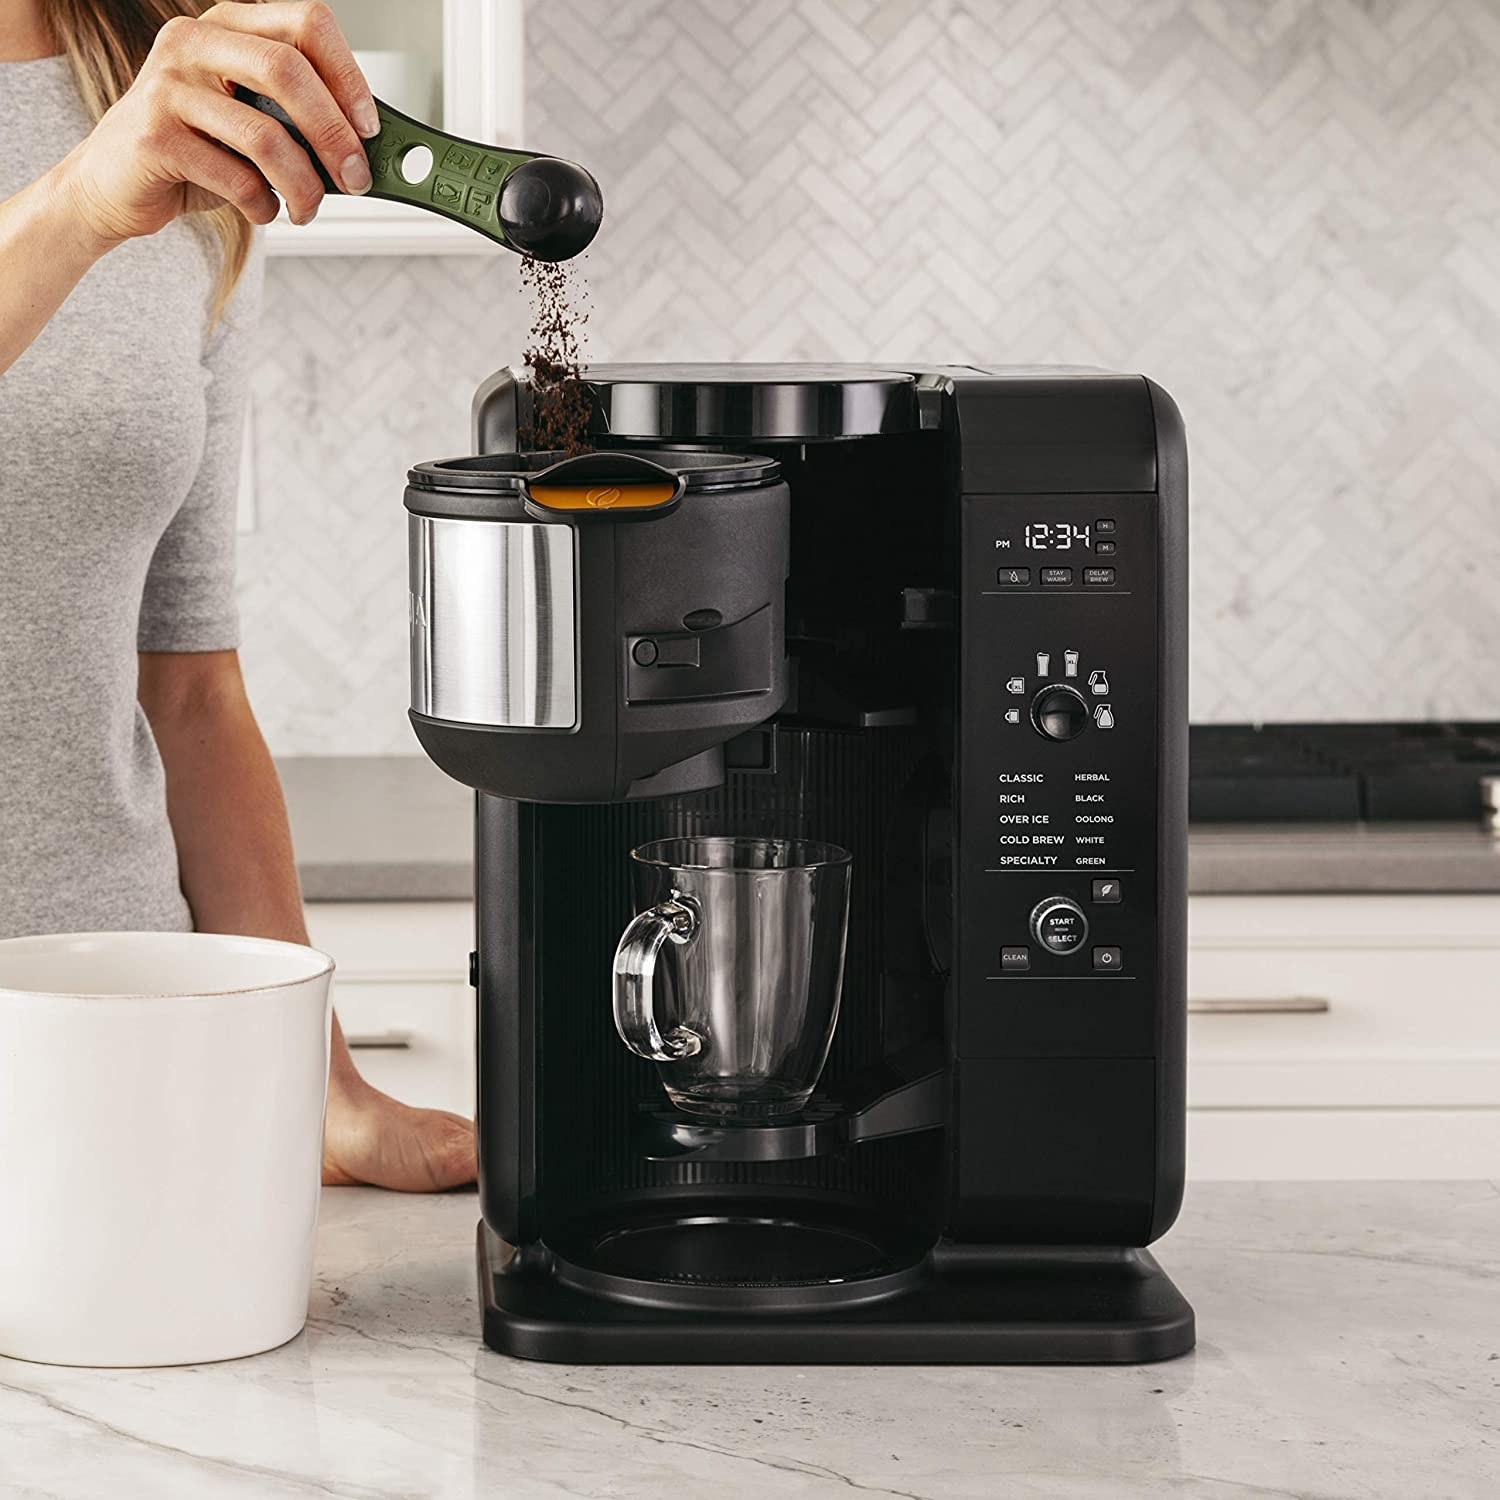 A person putting coffee grounds into the coffee maker